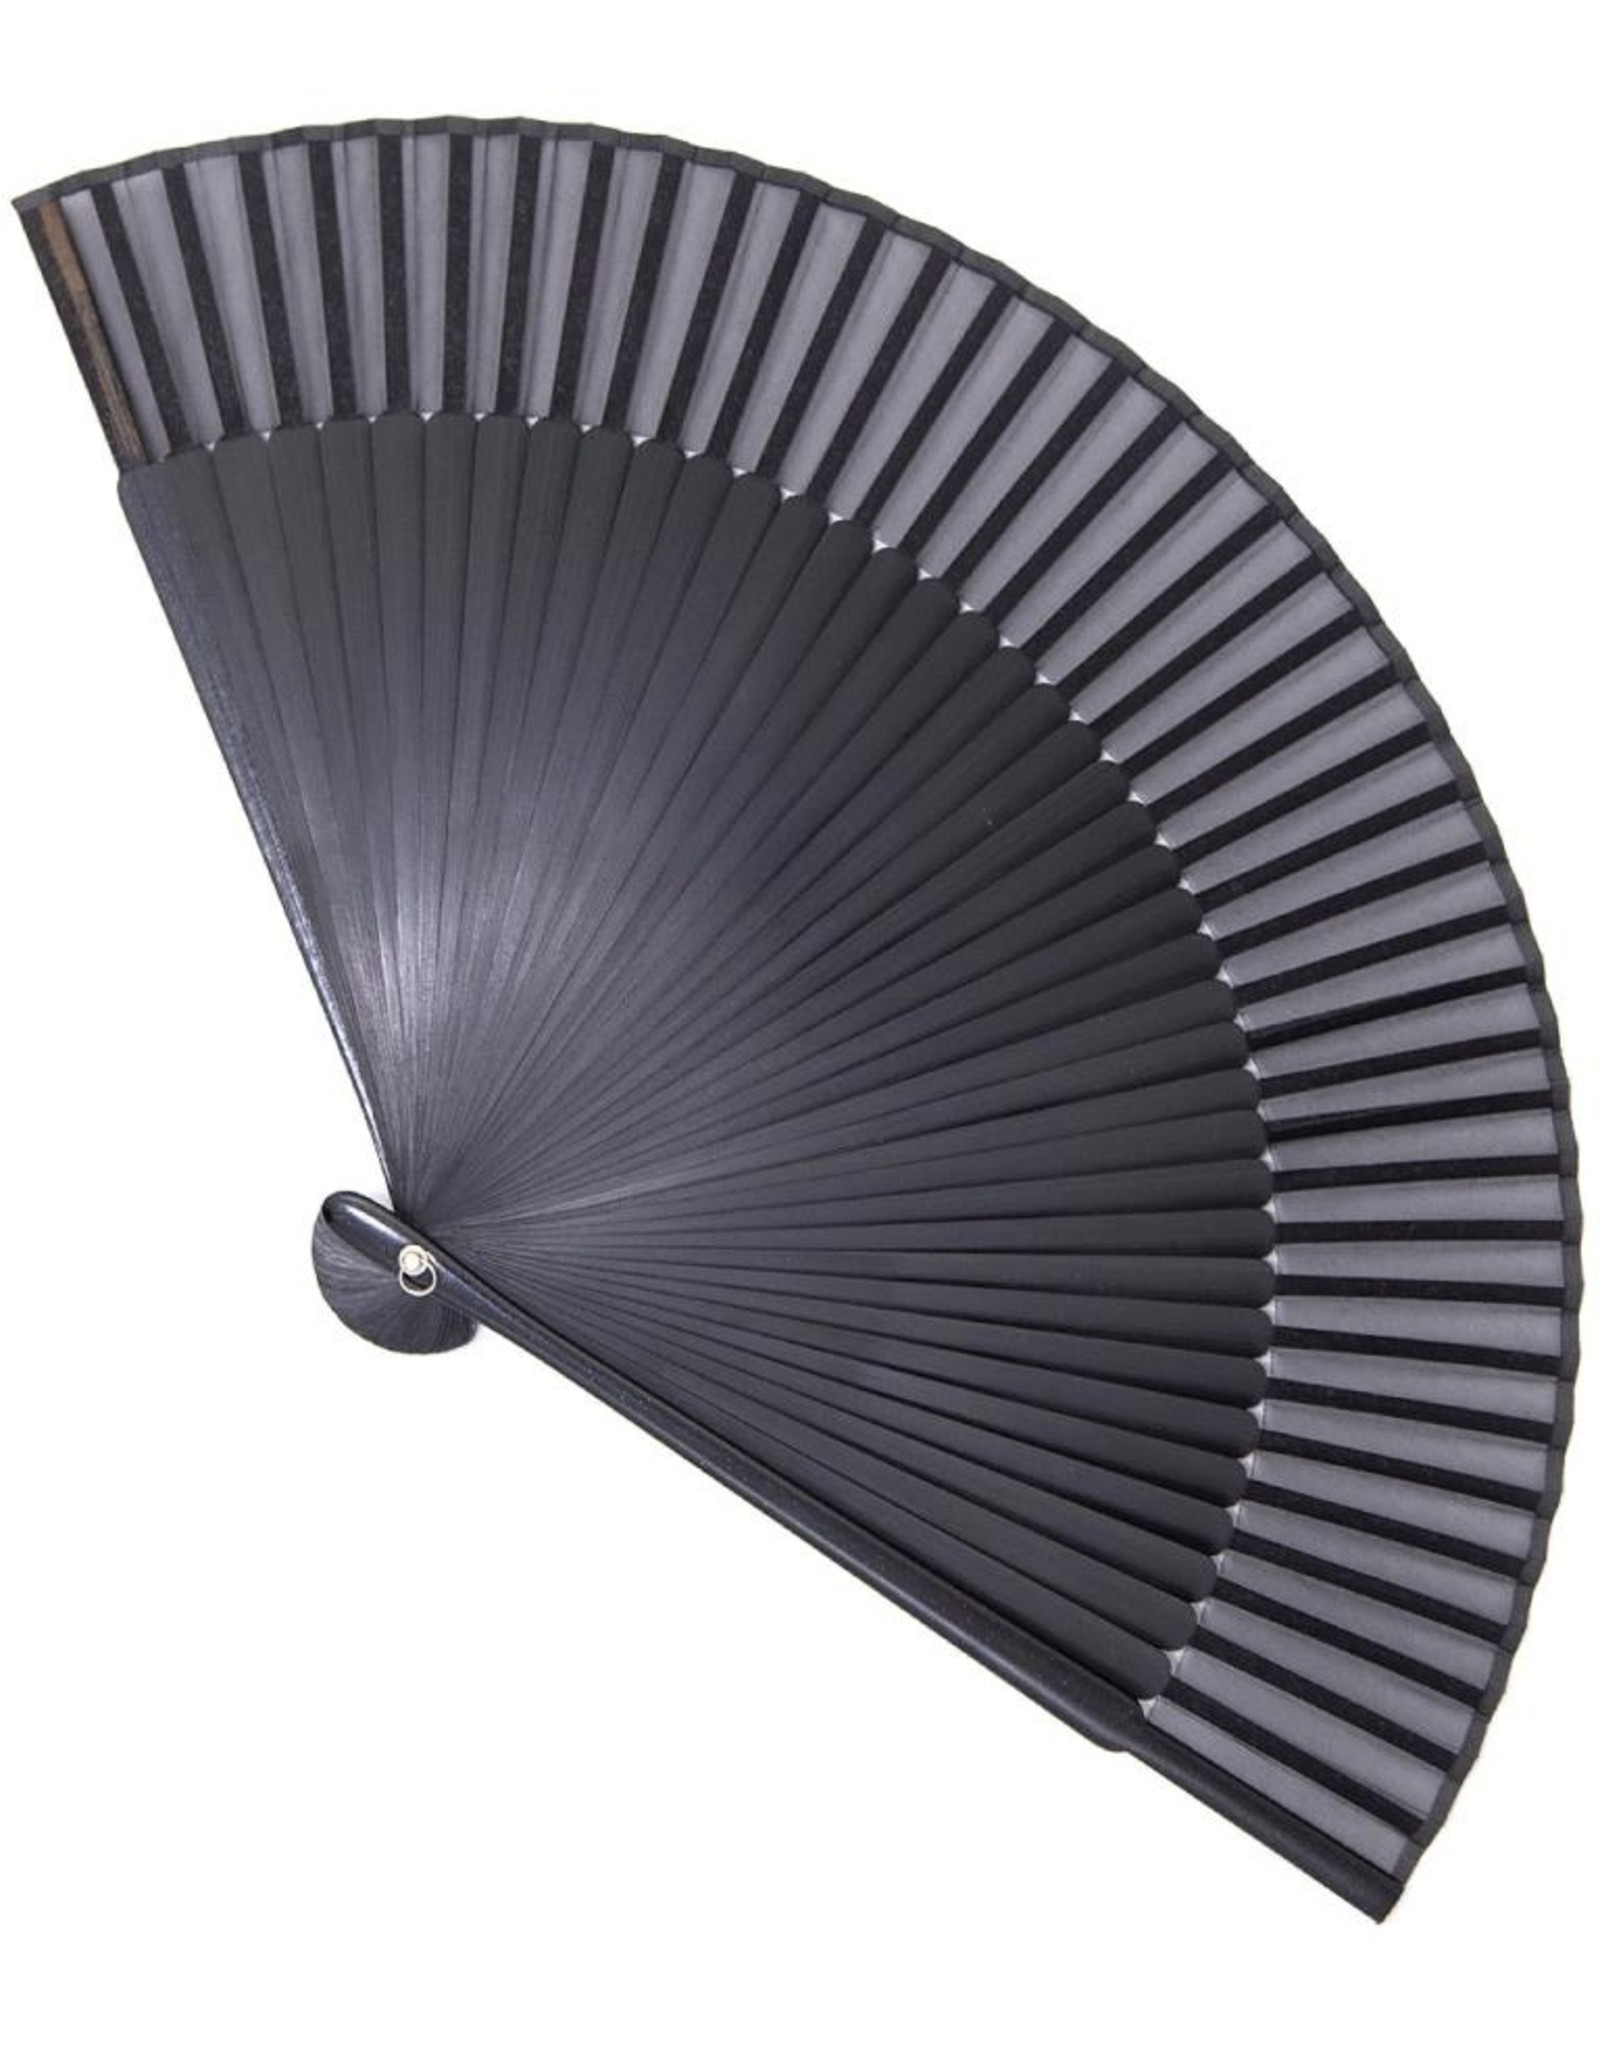 Banned Gothic Steampunk accessories - Victorian Fan with Bamboo Frame black